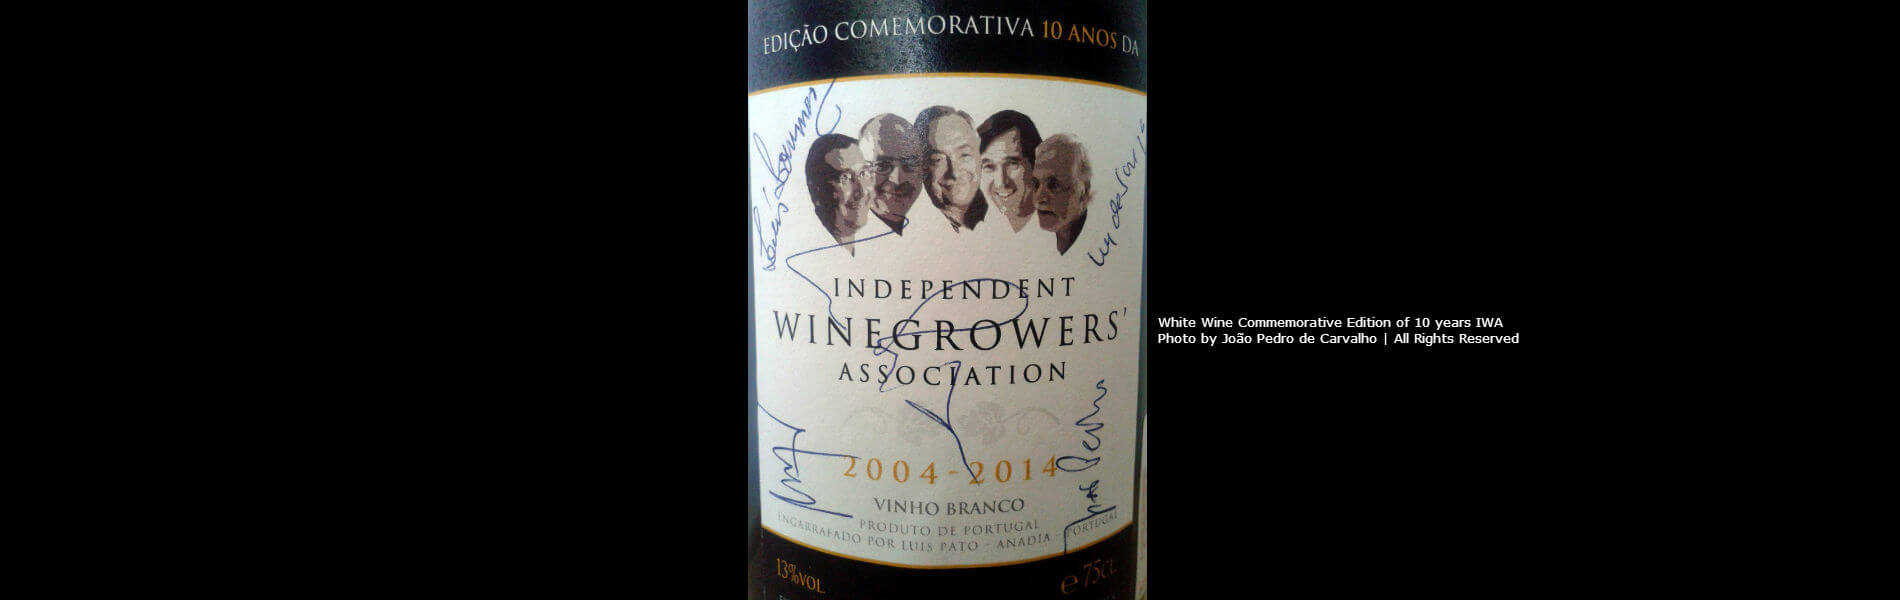 Blend-All-About-Wine-IWA-10-years-Slider